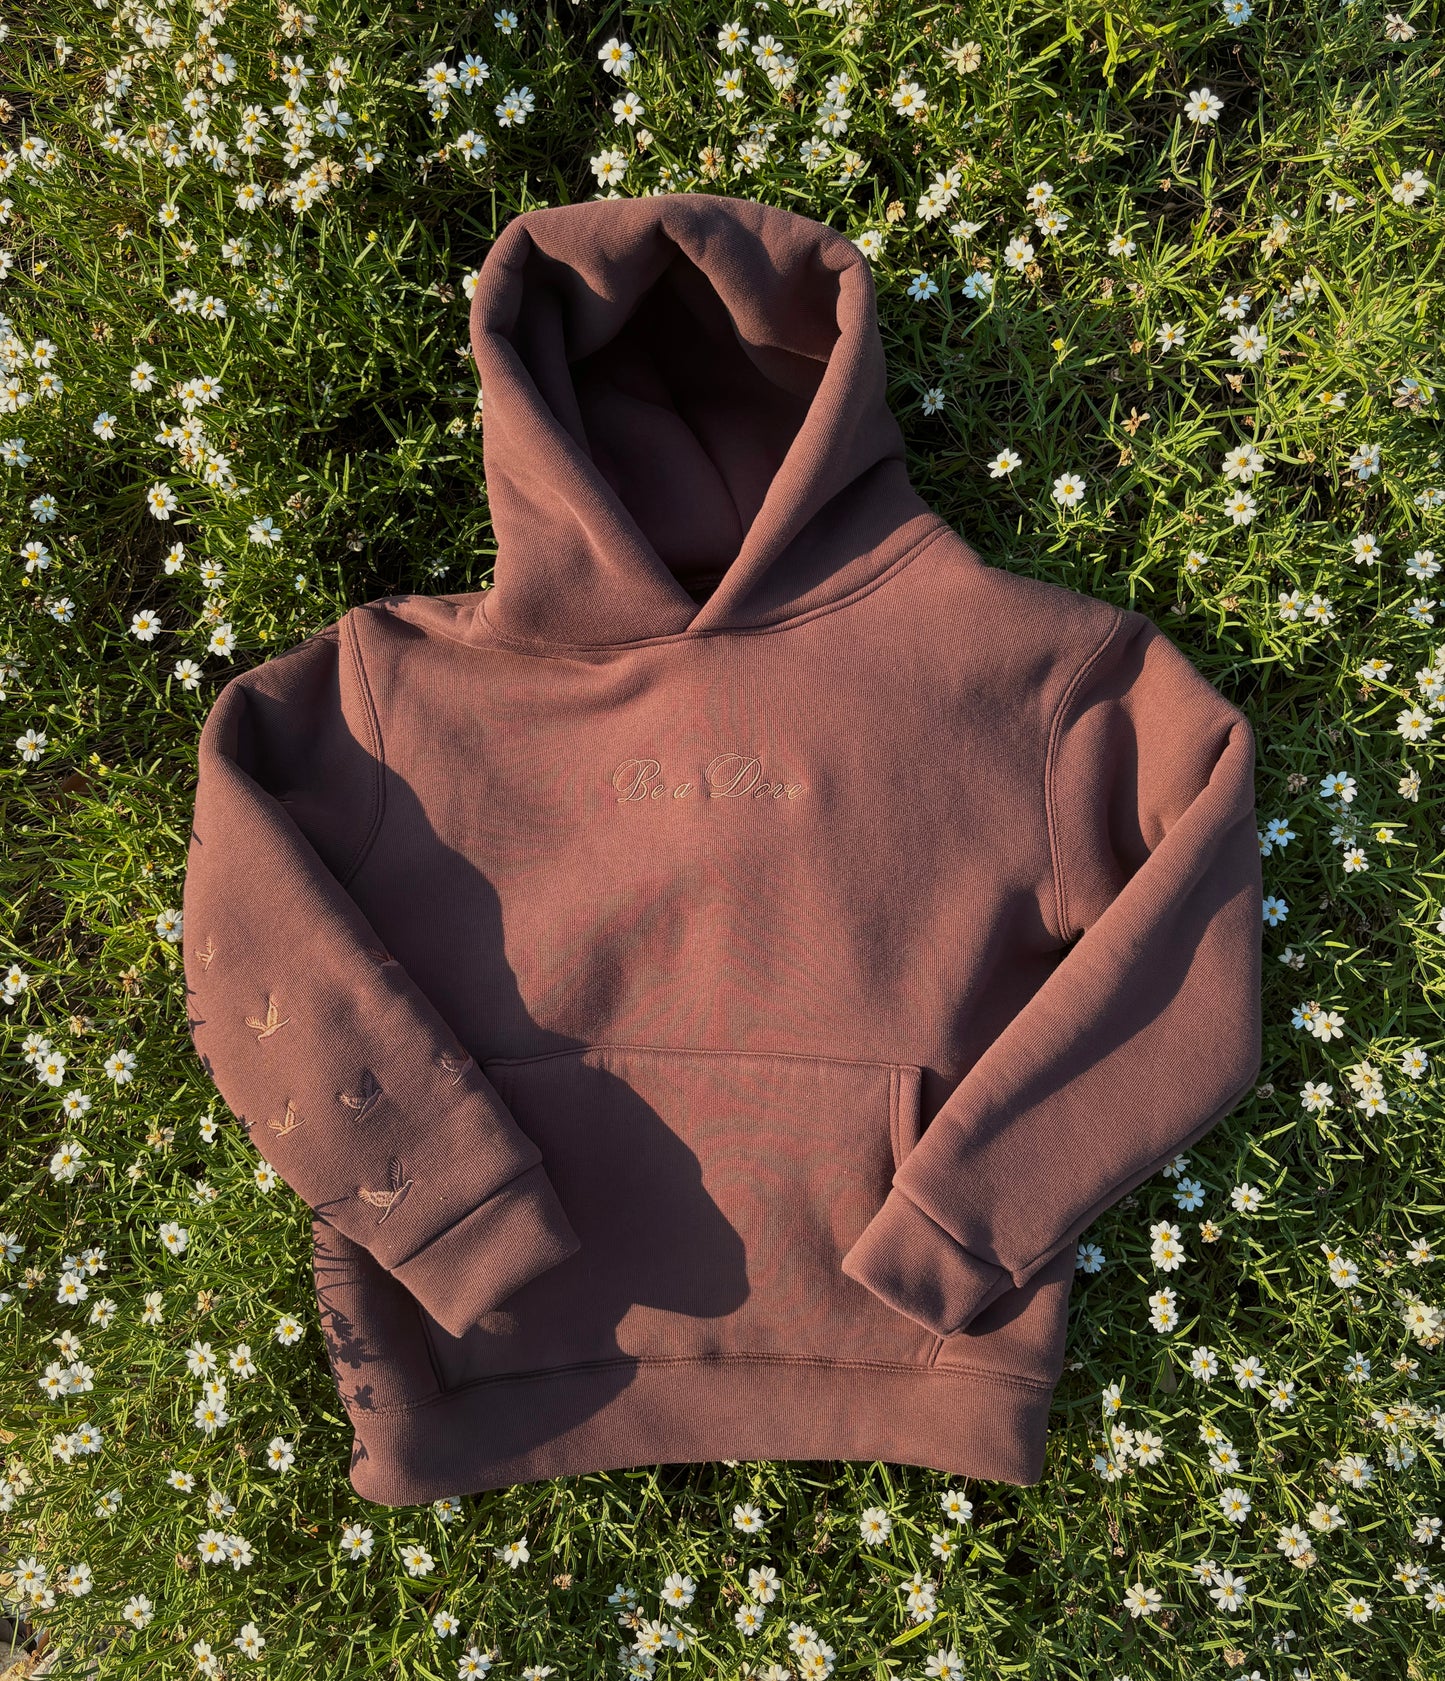 “Be a Dove” - Thick Whool Embroidered Hoodie